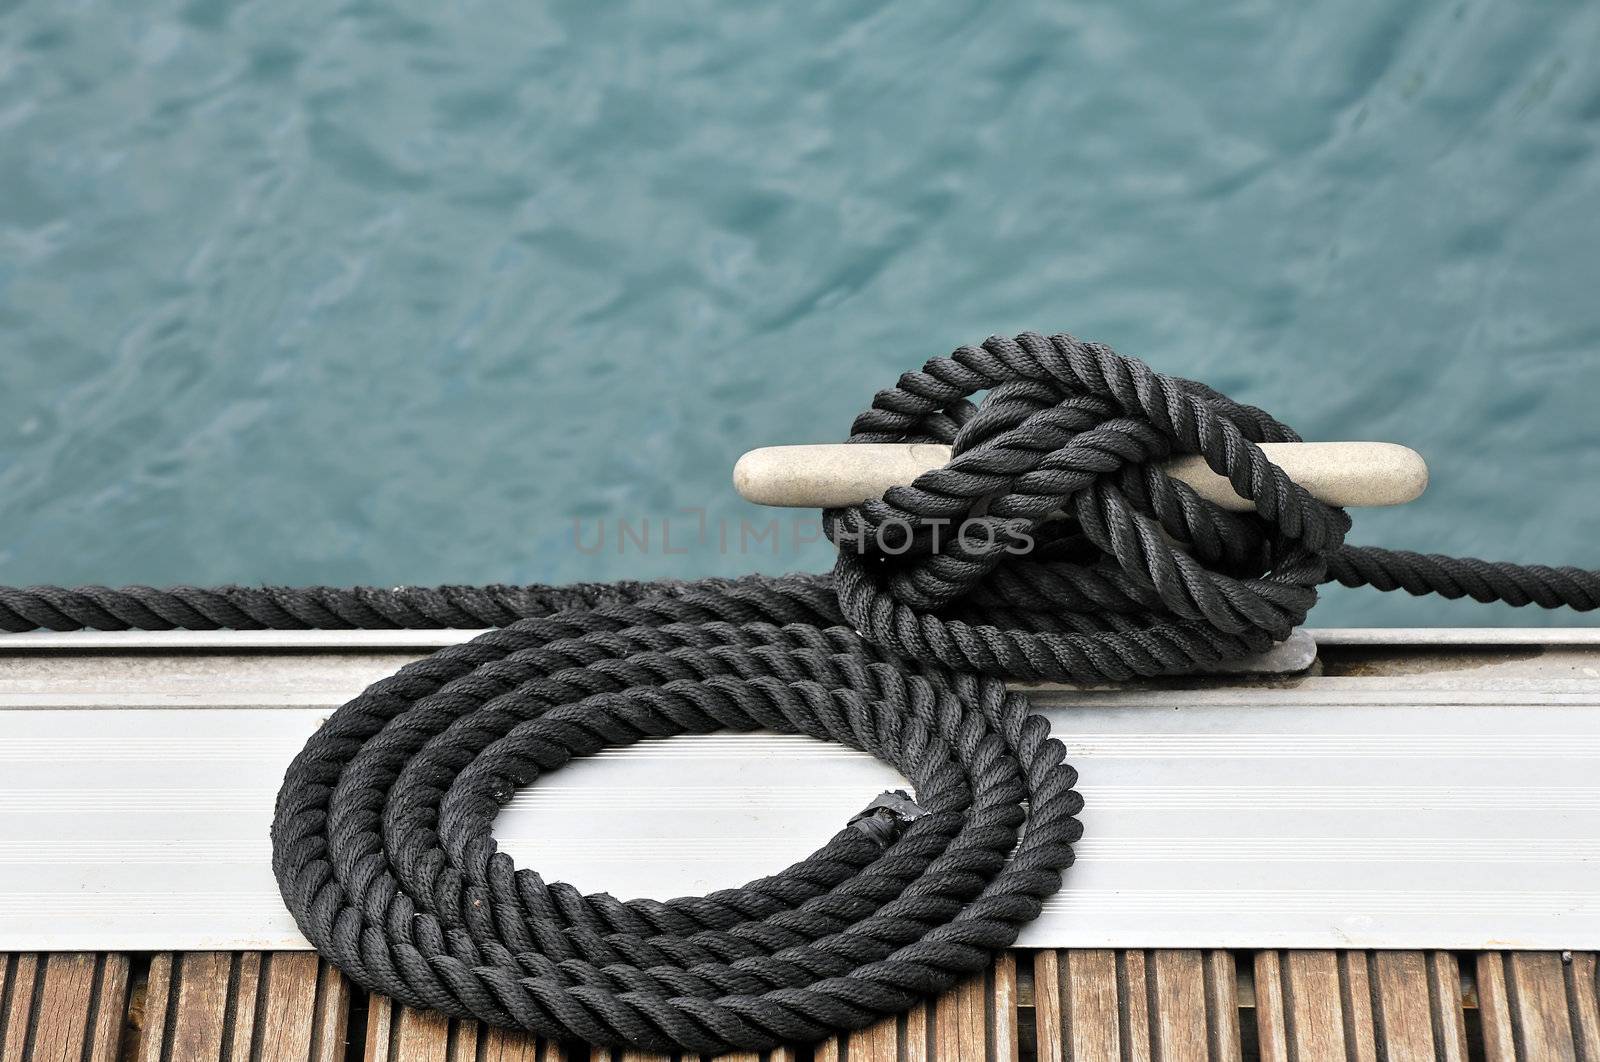 Black rope tied up on a bitt securing boat to jetty